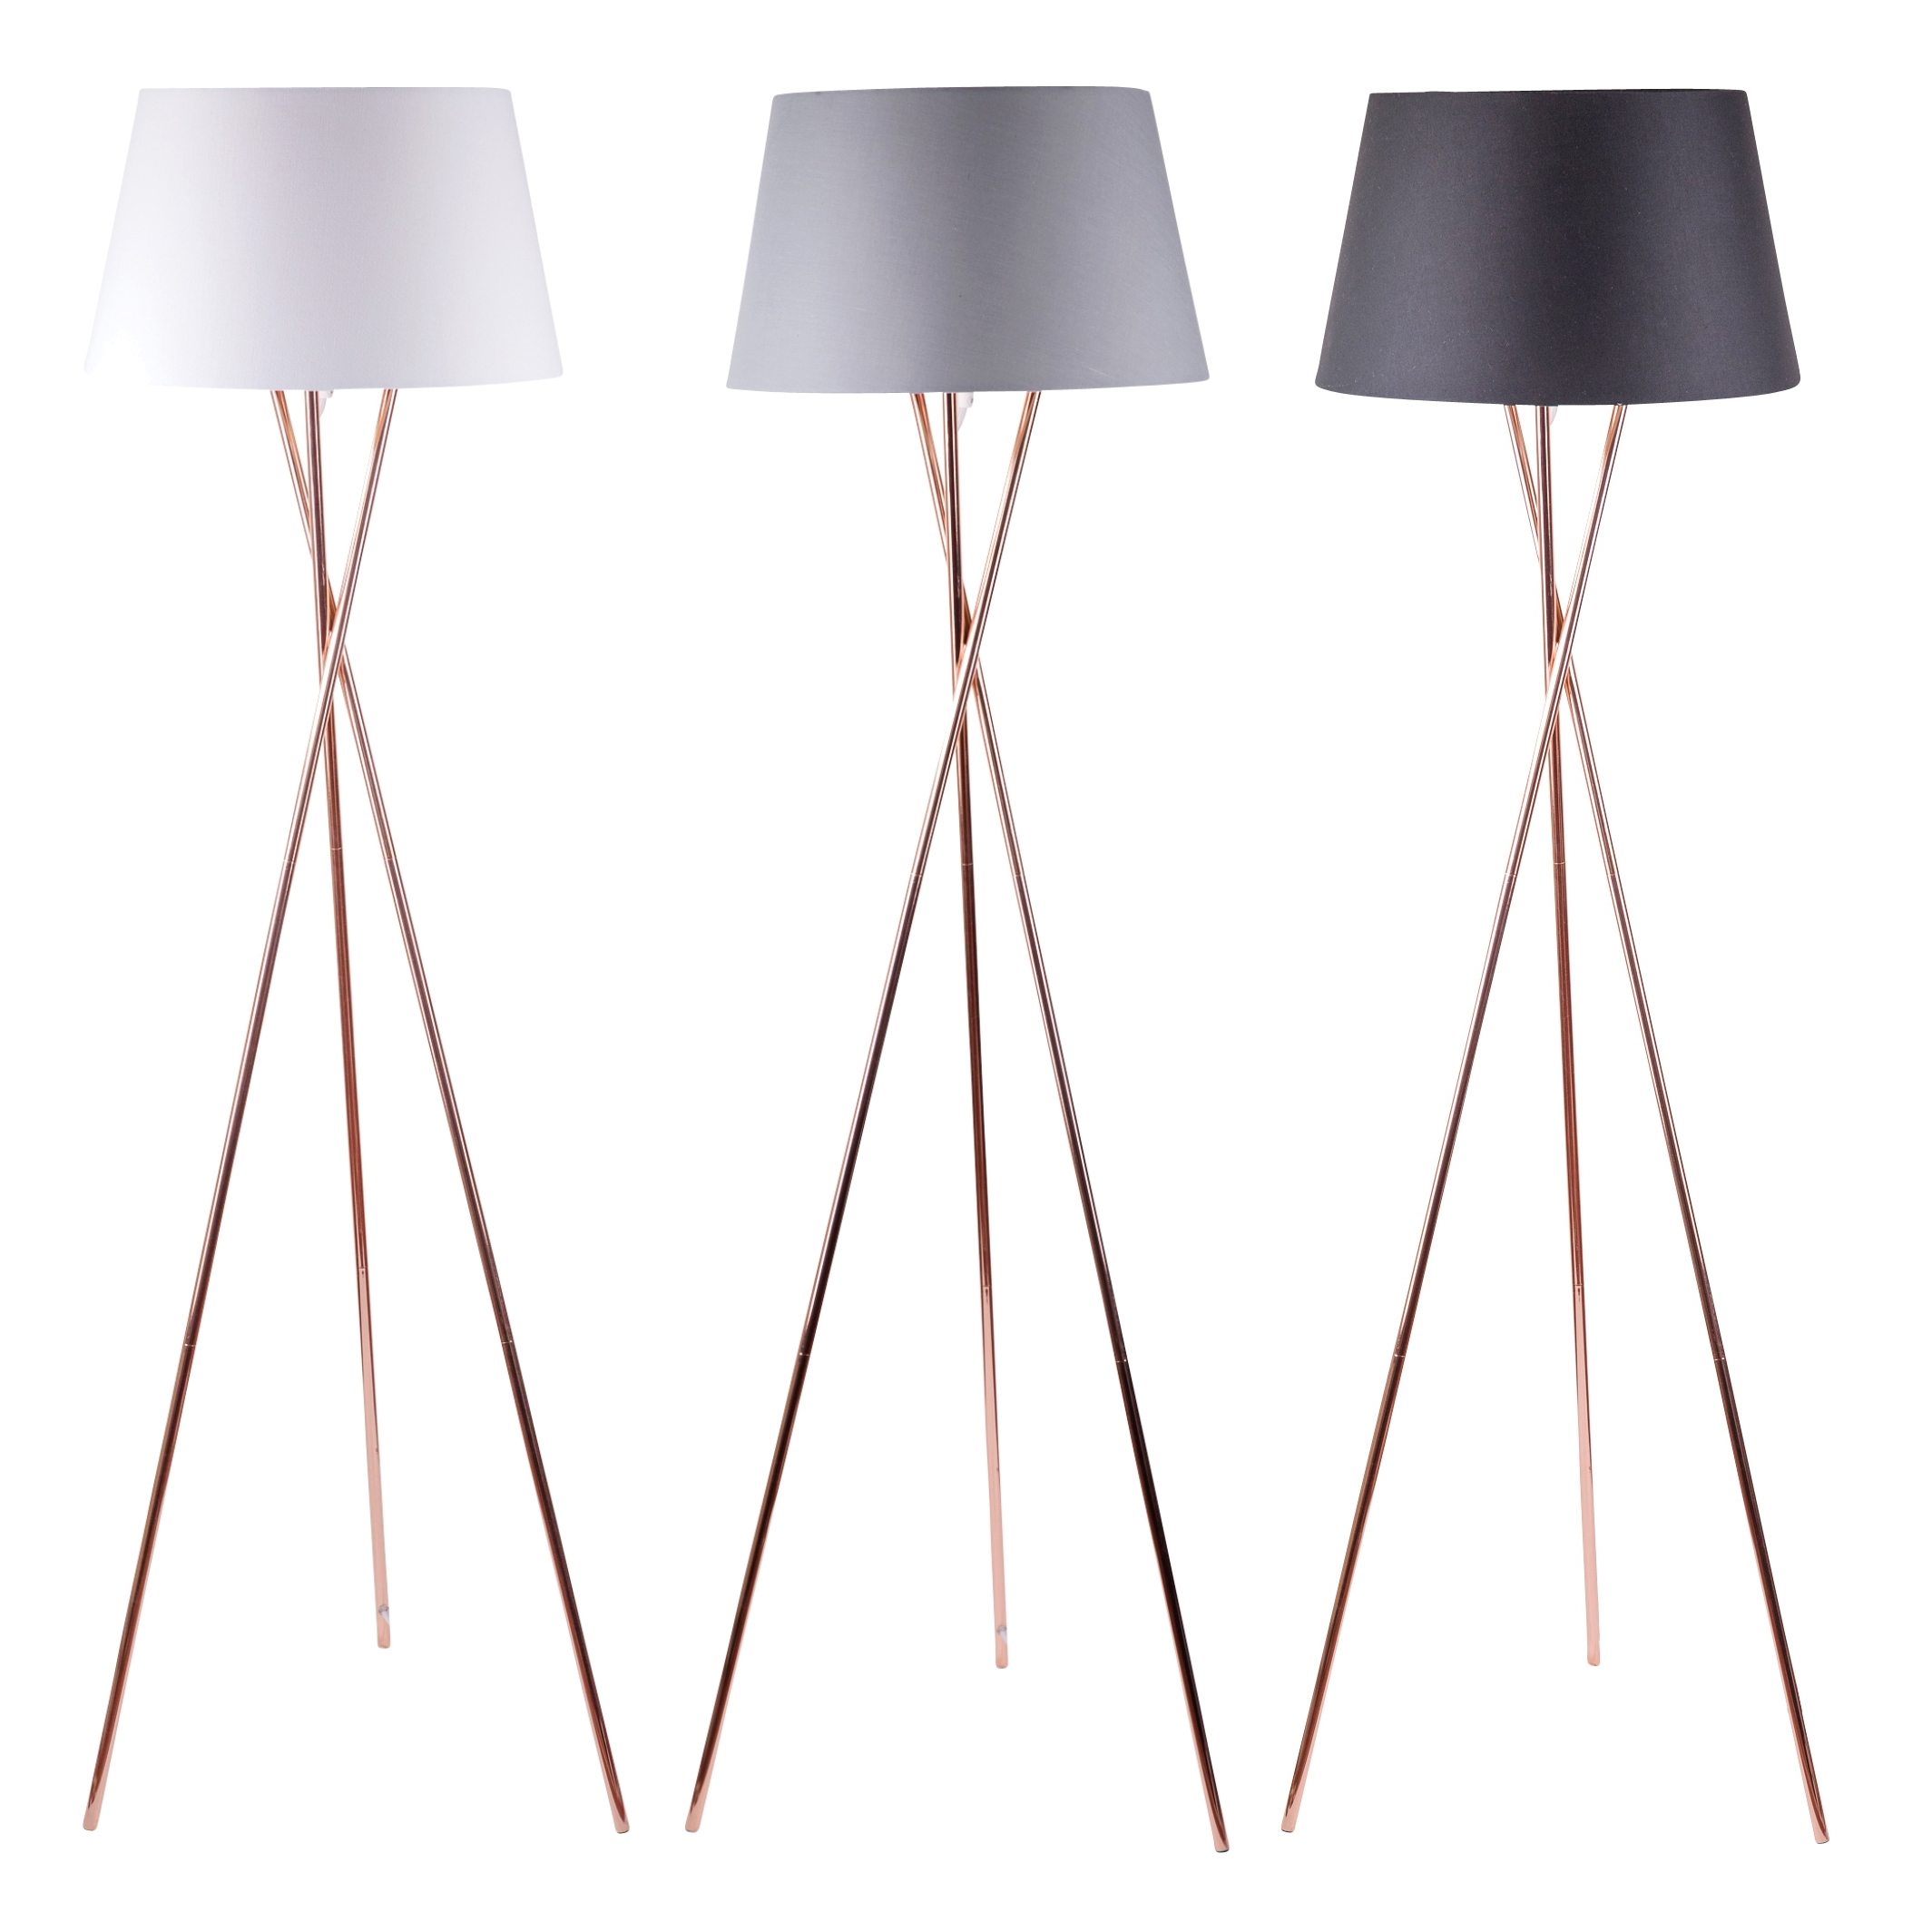 Details About Modern Copper Tripod Floor Lamp Standard Light With Grey White Or Black Shade pertaining to measurements 2129 X 2129